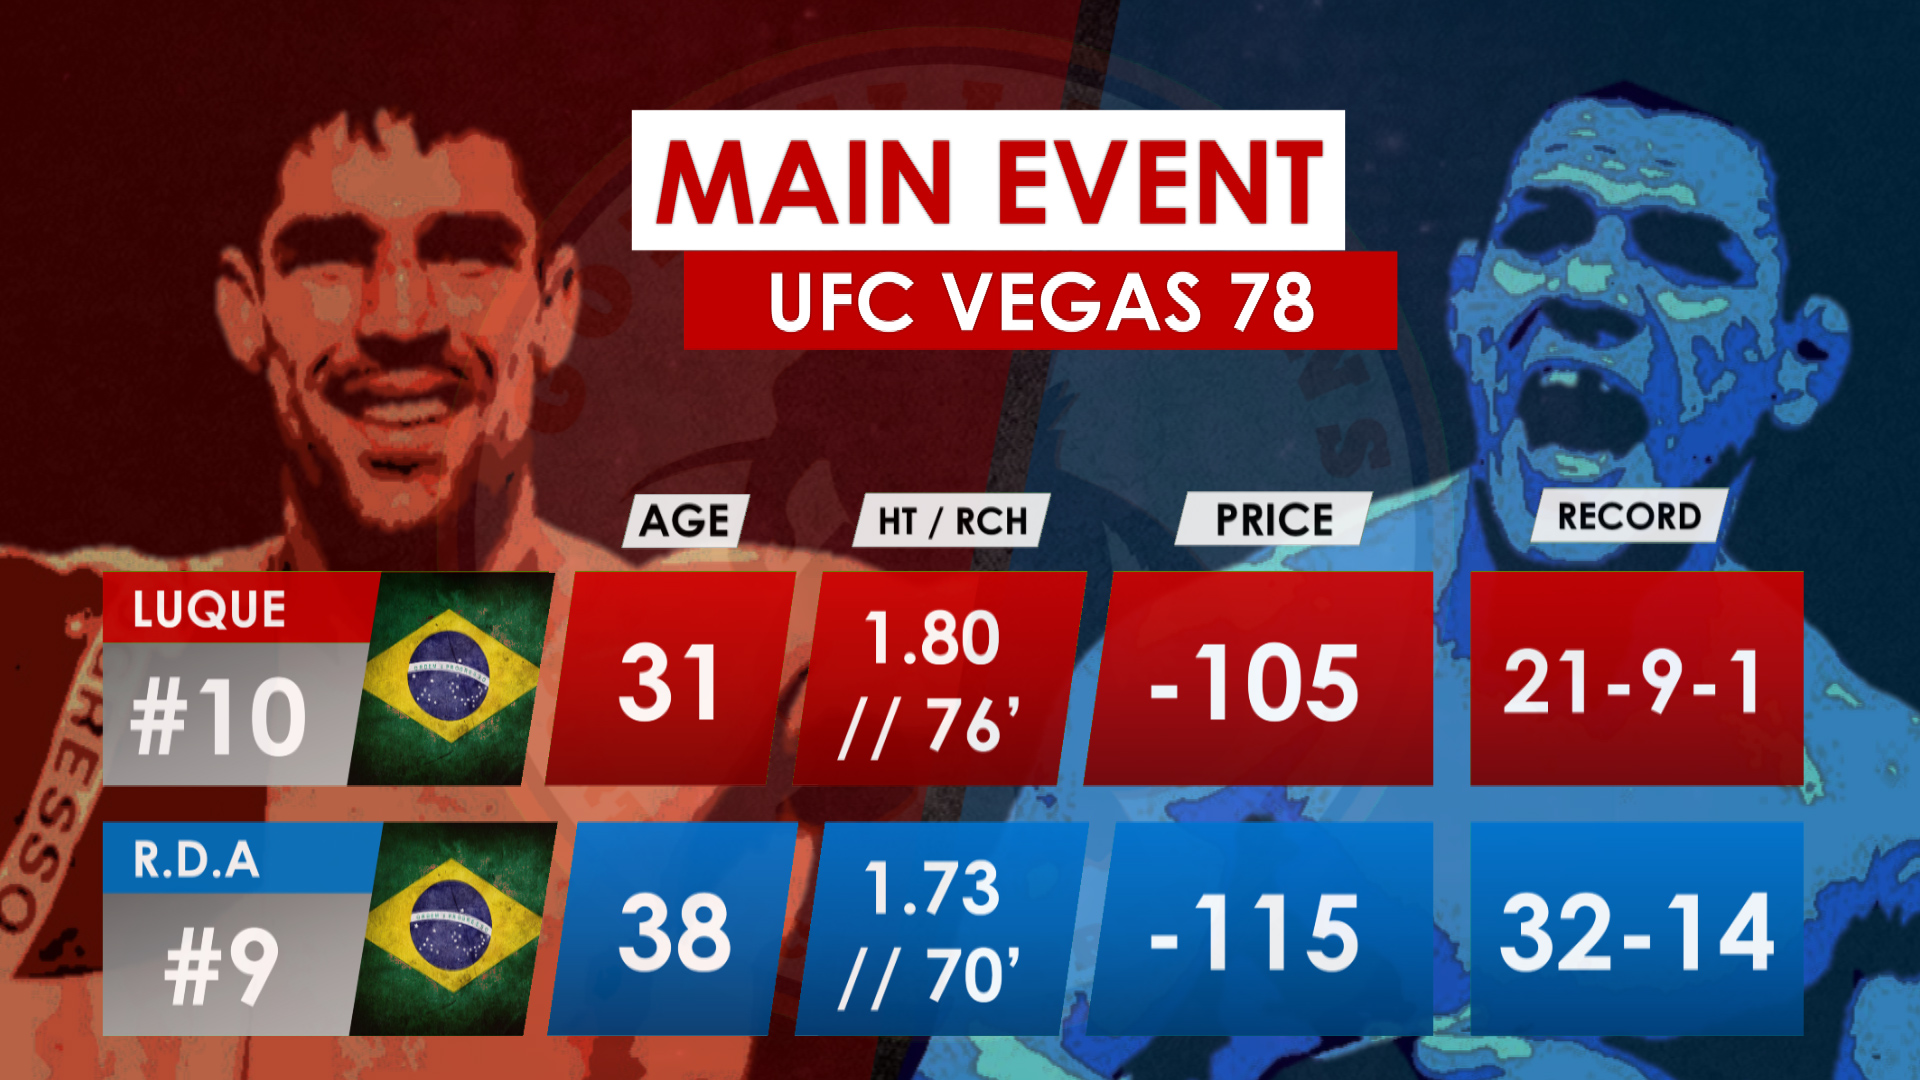 UFC Vegas 78: Luque vs Dos Anjos tale of the tape